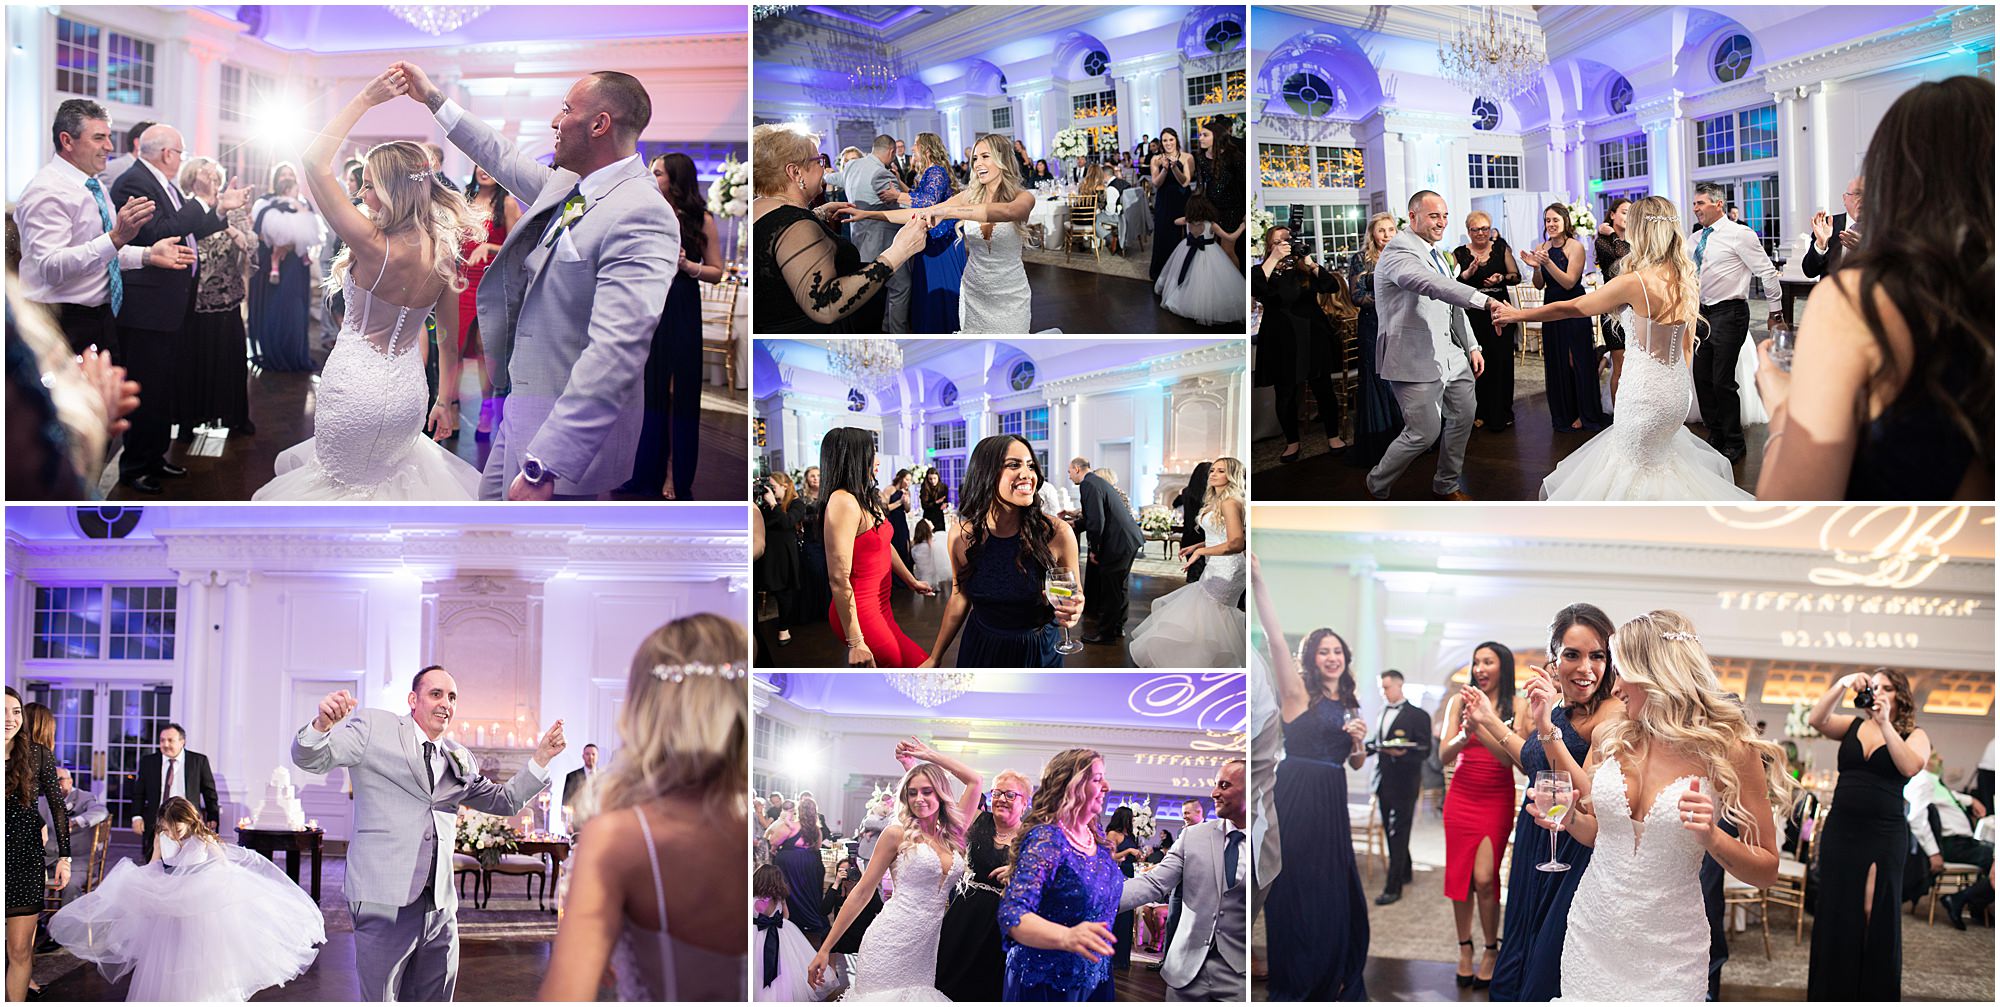 A bride and groom and their guests party at their wedding reception!